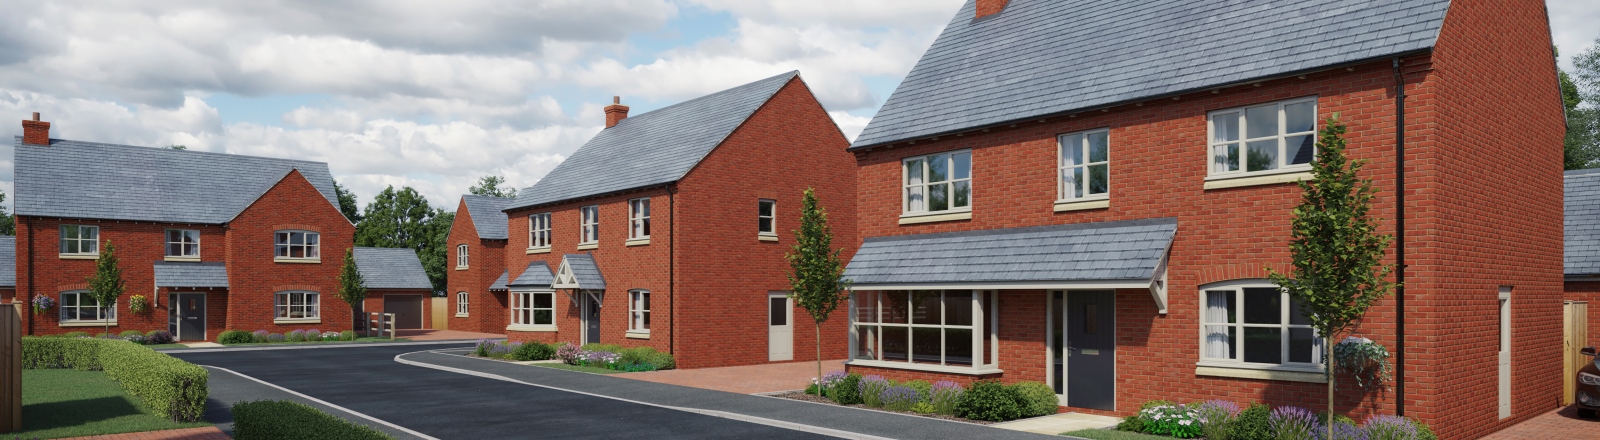 A street view of the new homes for sale at The Stables in North Kilworth | The Stables | Bowbridge Homes